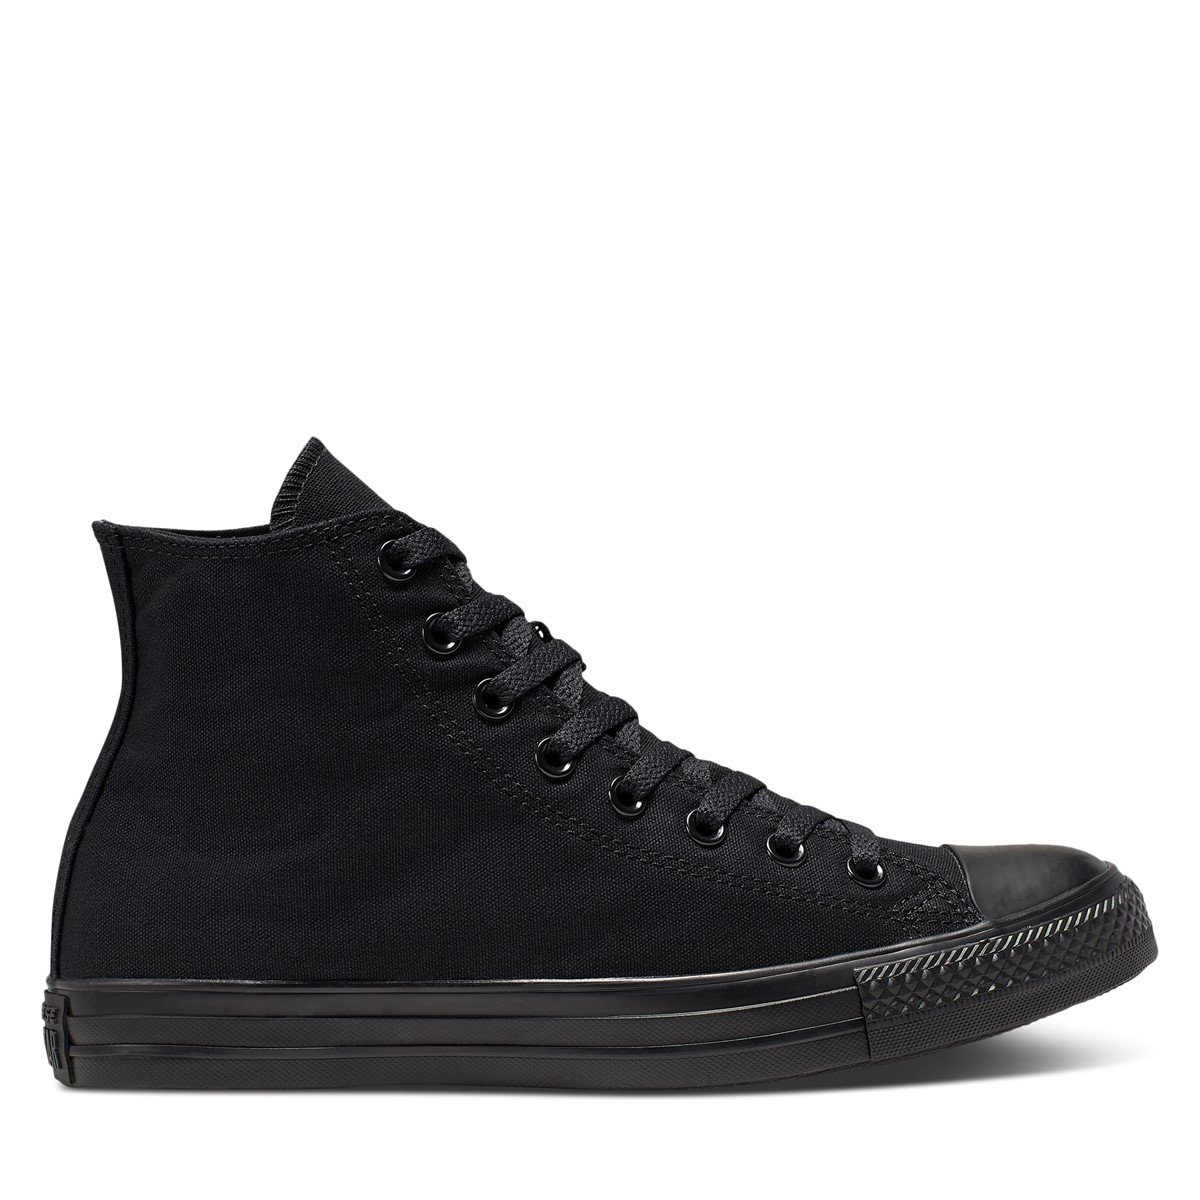 Baskets Chuck Taylor All Star Classic noires